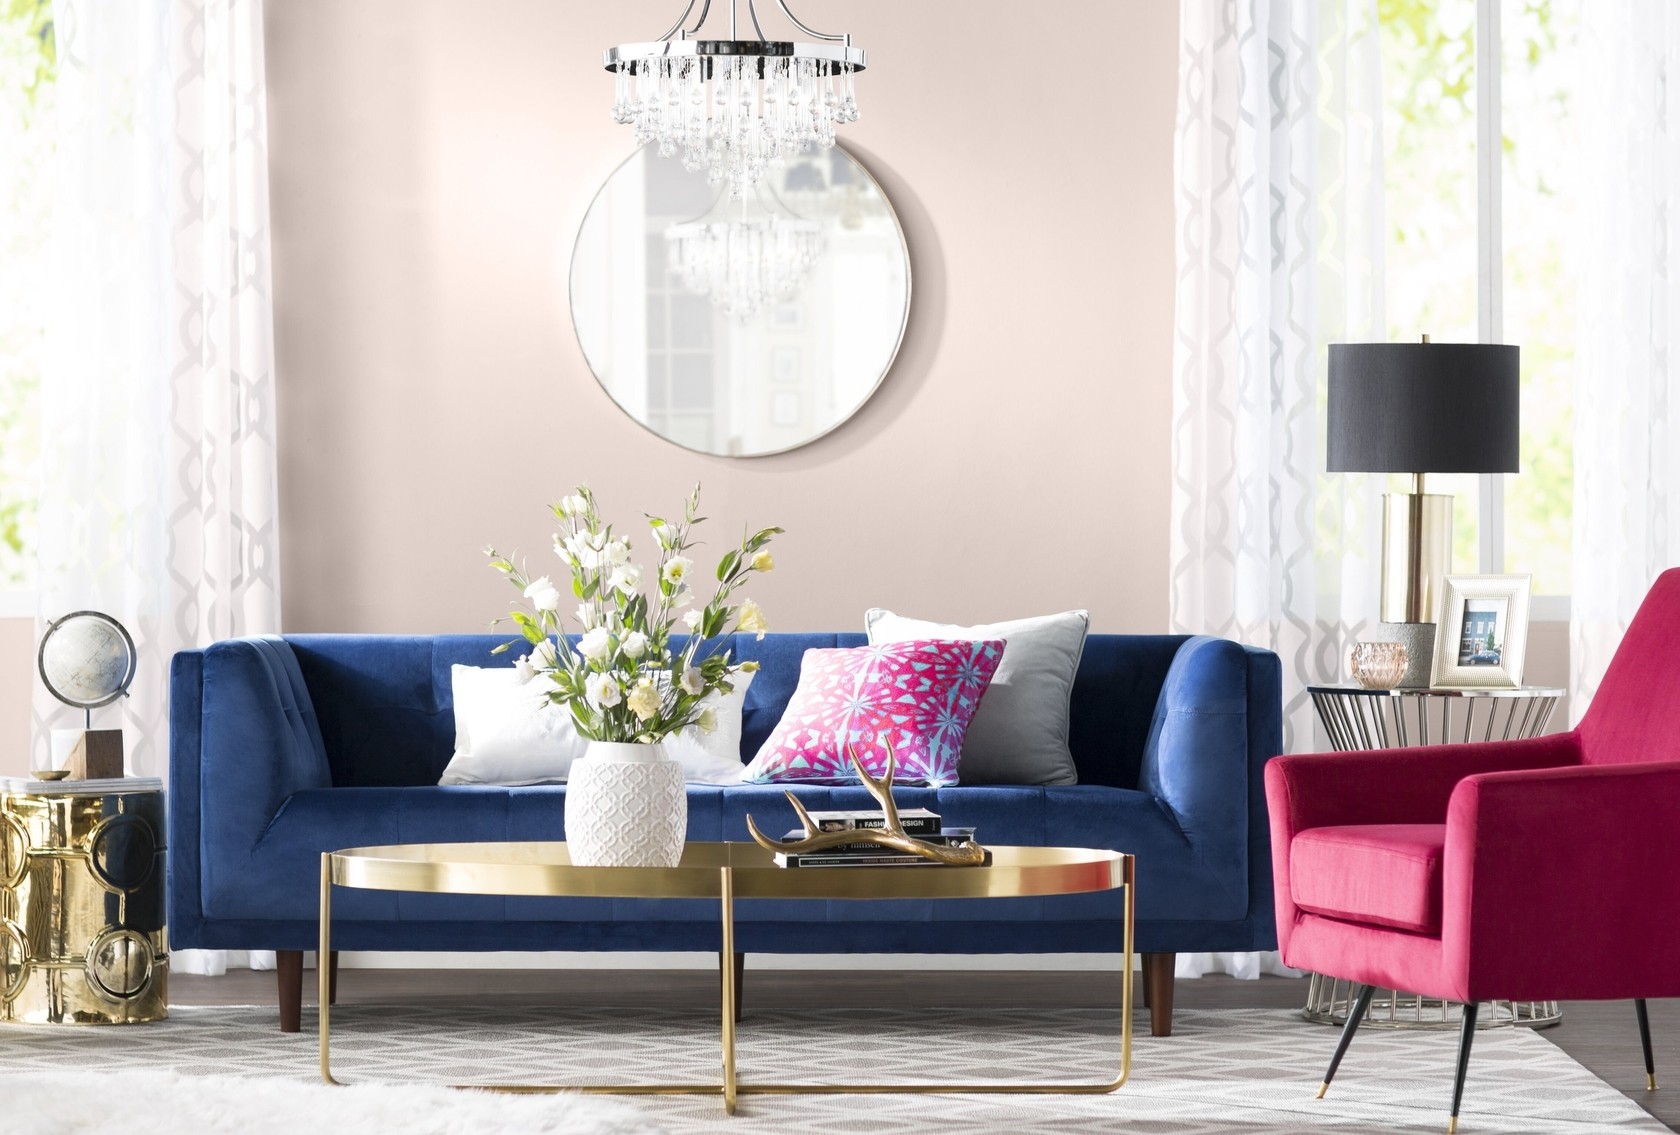 1-1-2 Colors That Go With Royal Blue When Decorating a Room